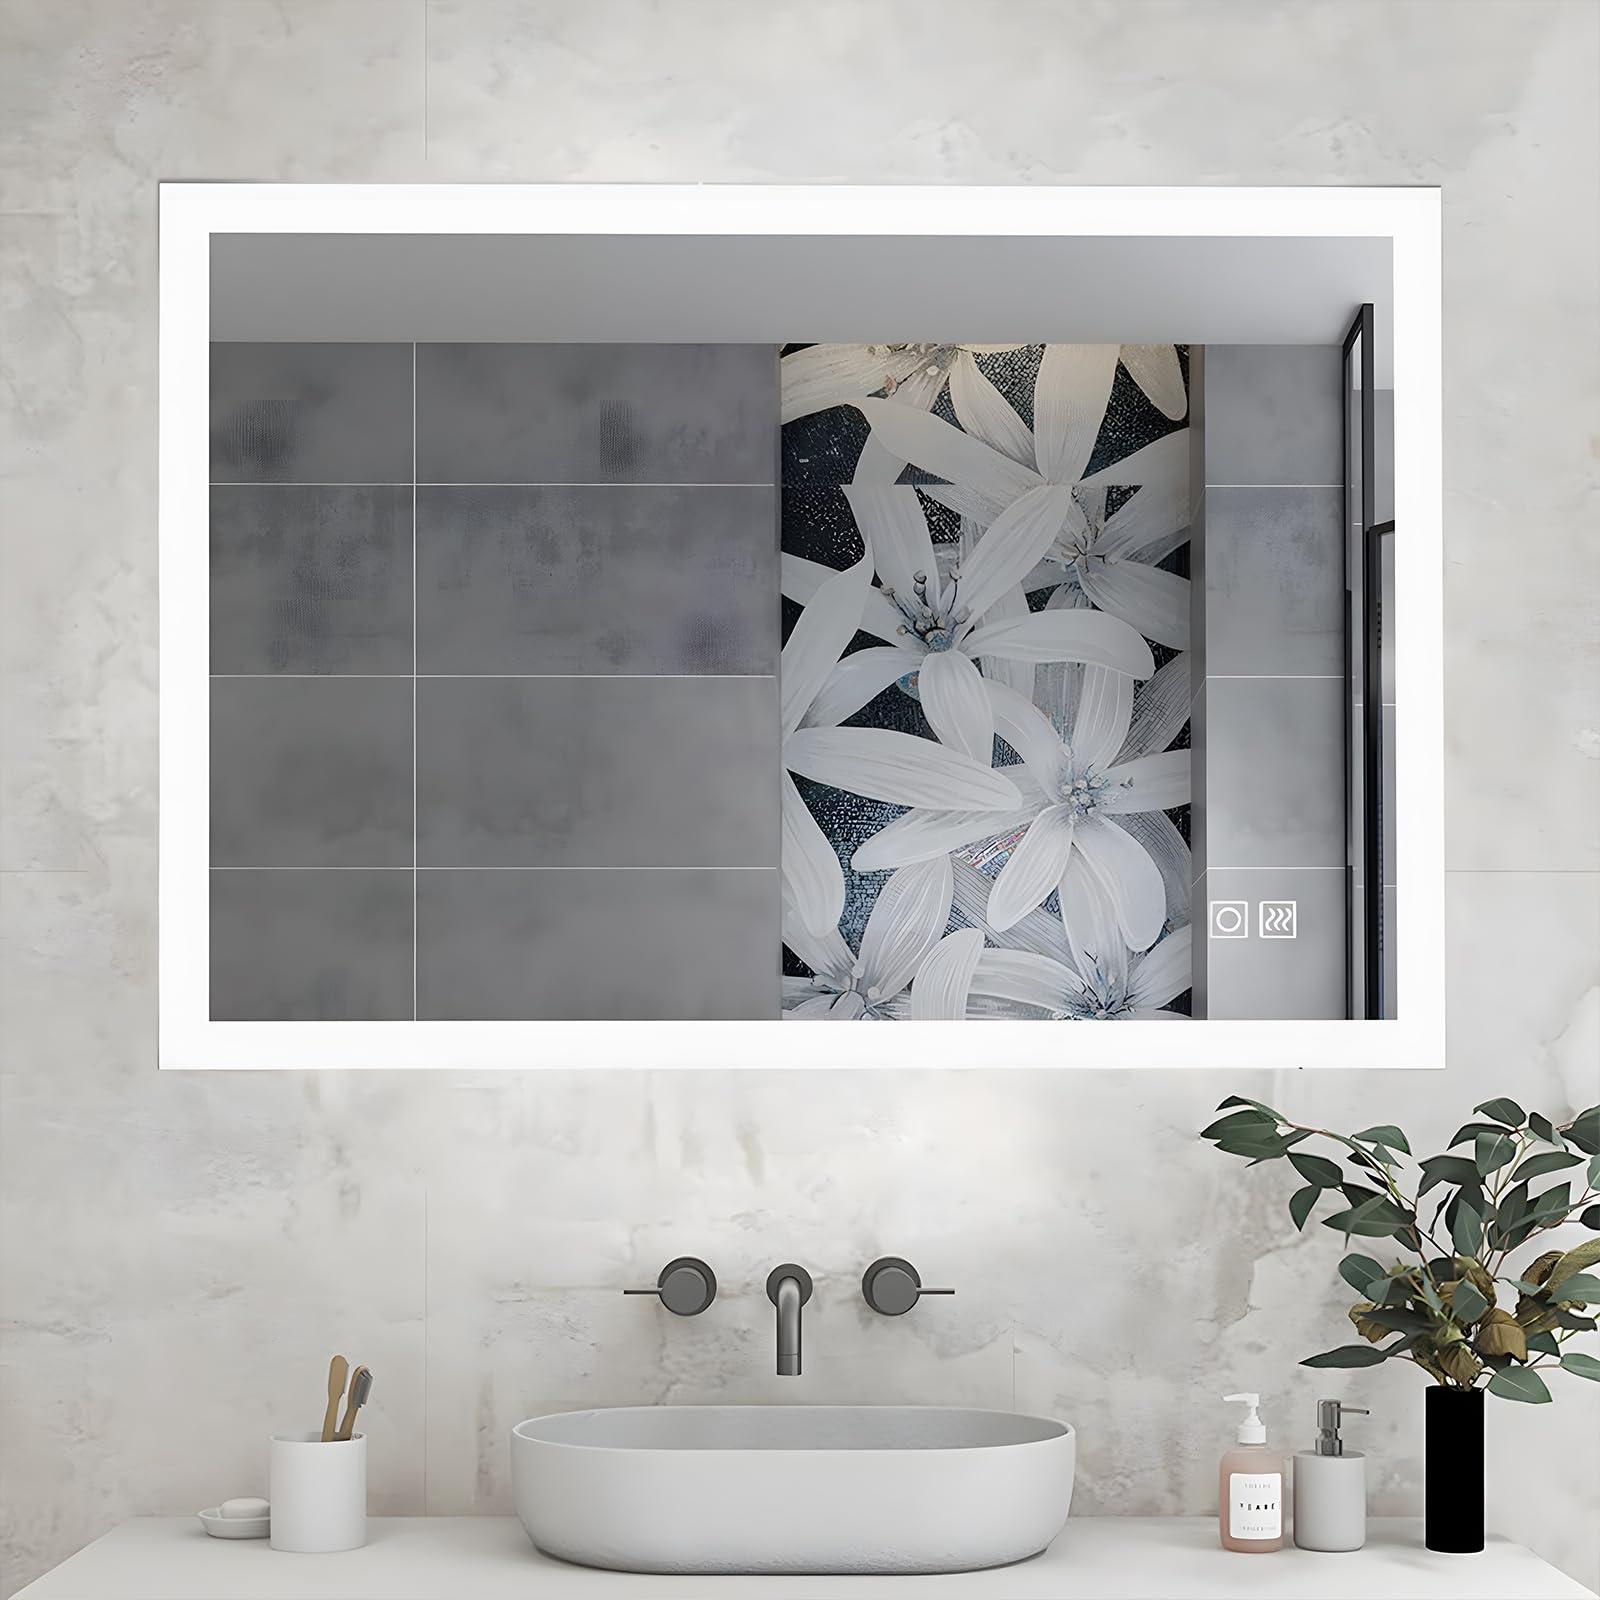 MIQU Bathroom Mirror 600 x 500 mm with LED Light, Rectangular Large Illuminated Wall Mounted Makeup Mirror with 3 Colors Light & Anti-Fog for Bath,Bedroom,Hallway,Living Room